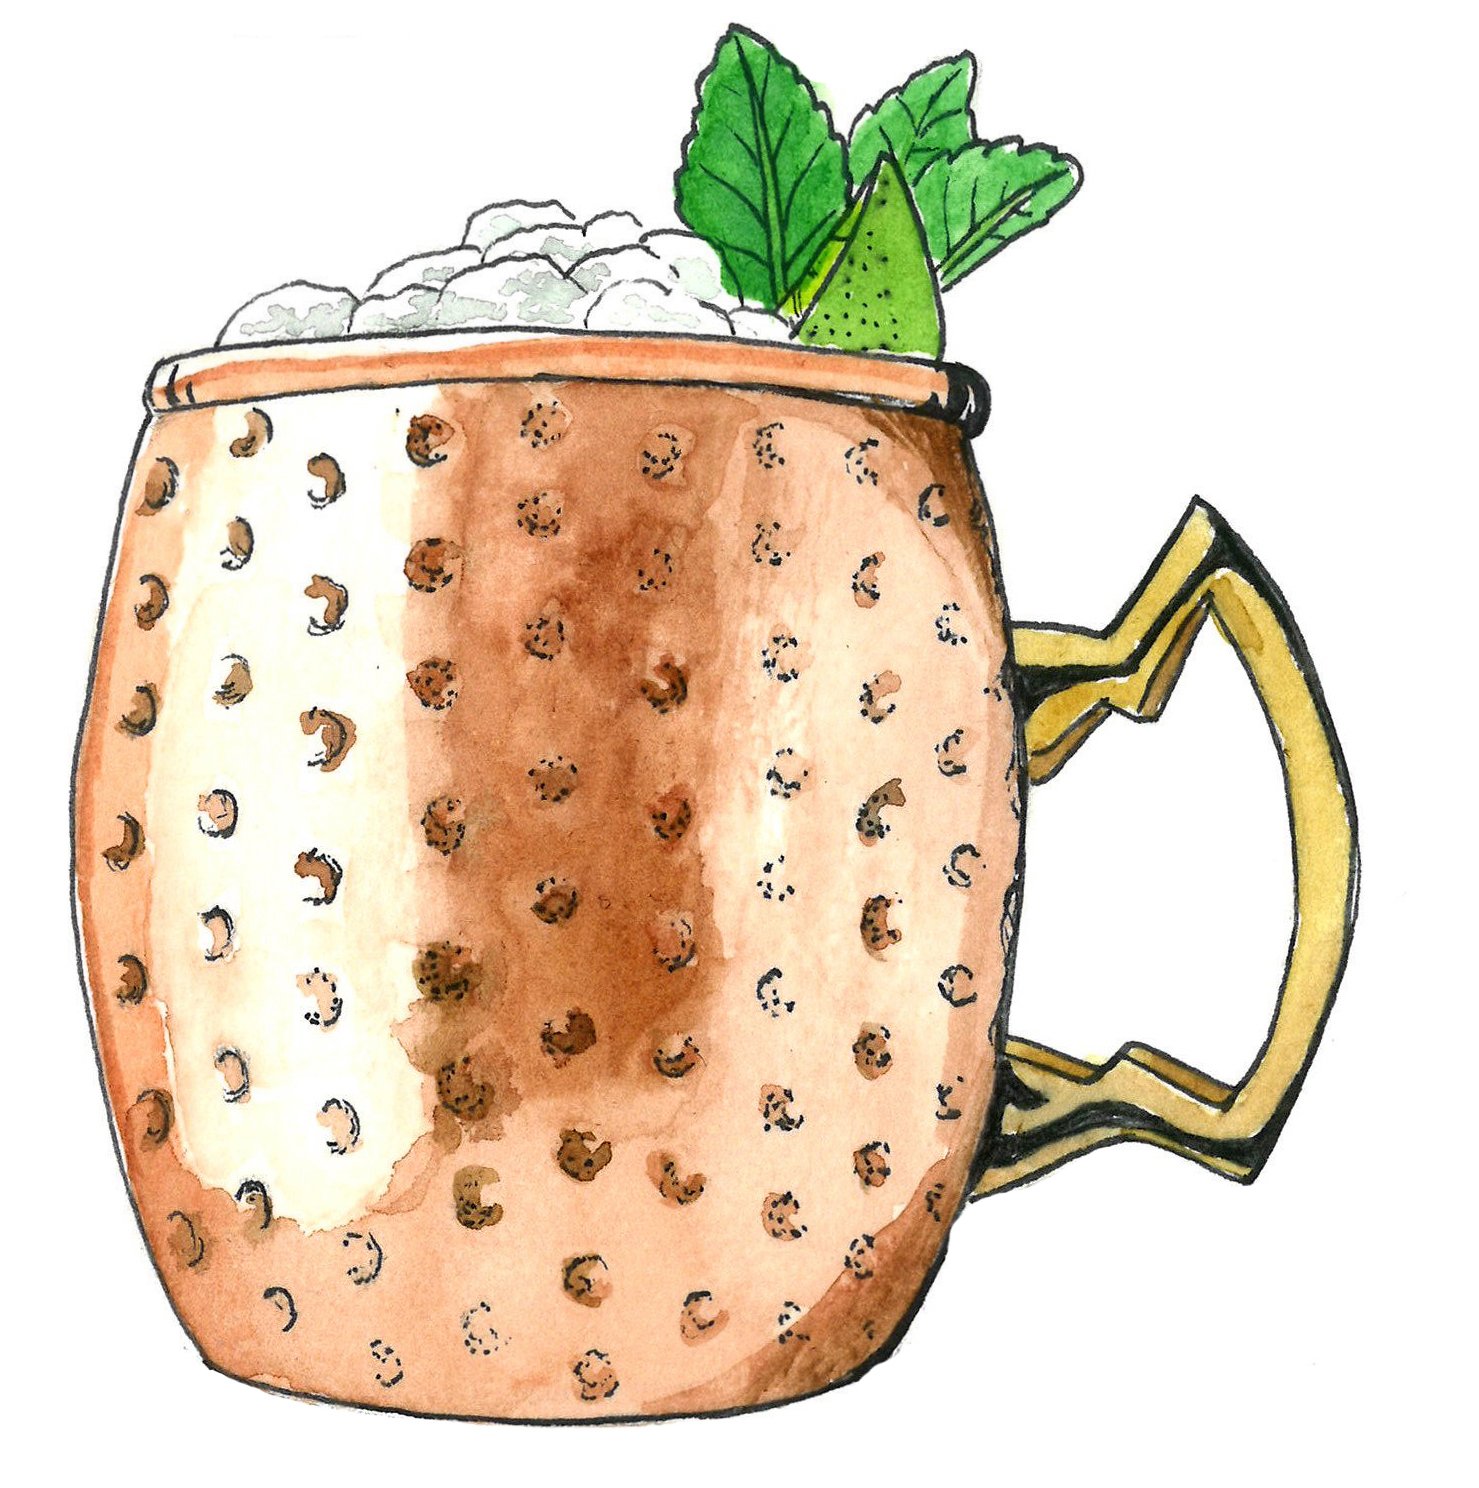 Illustration of historic alcoholic glass, the Moscow Mule copper mug